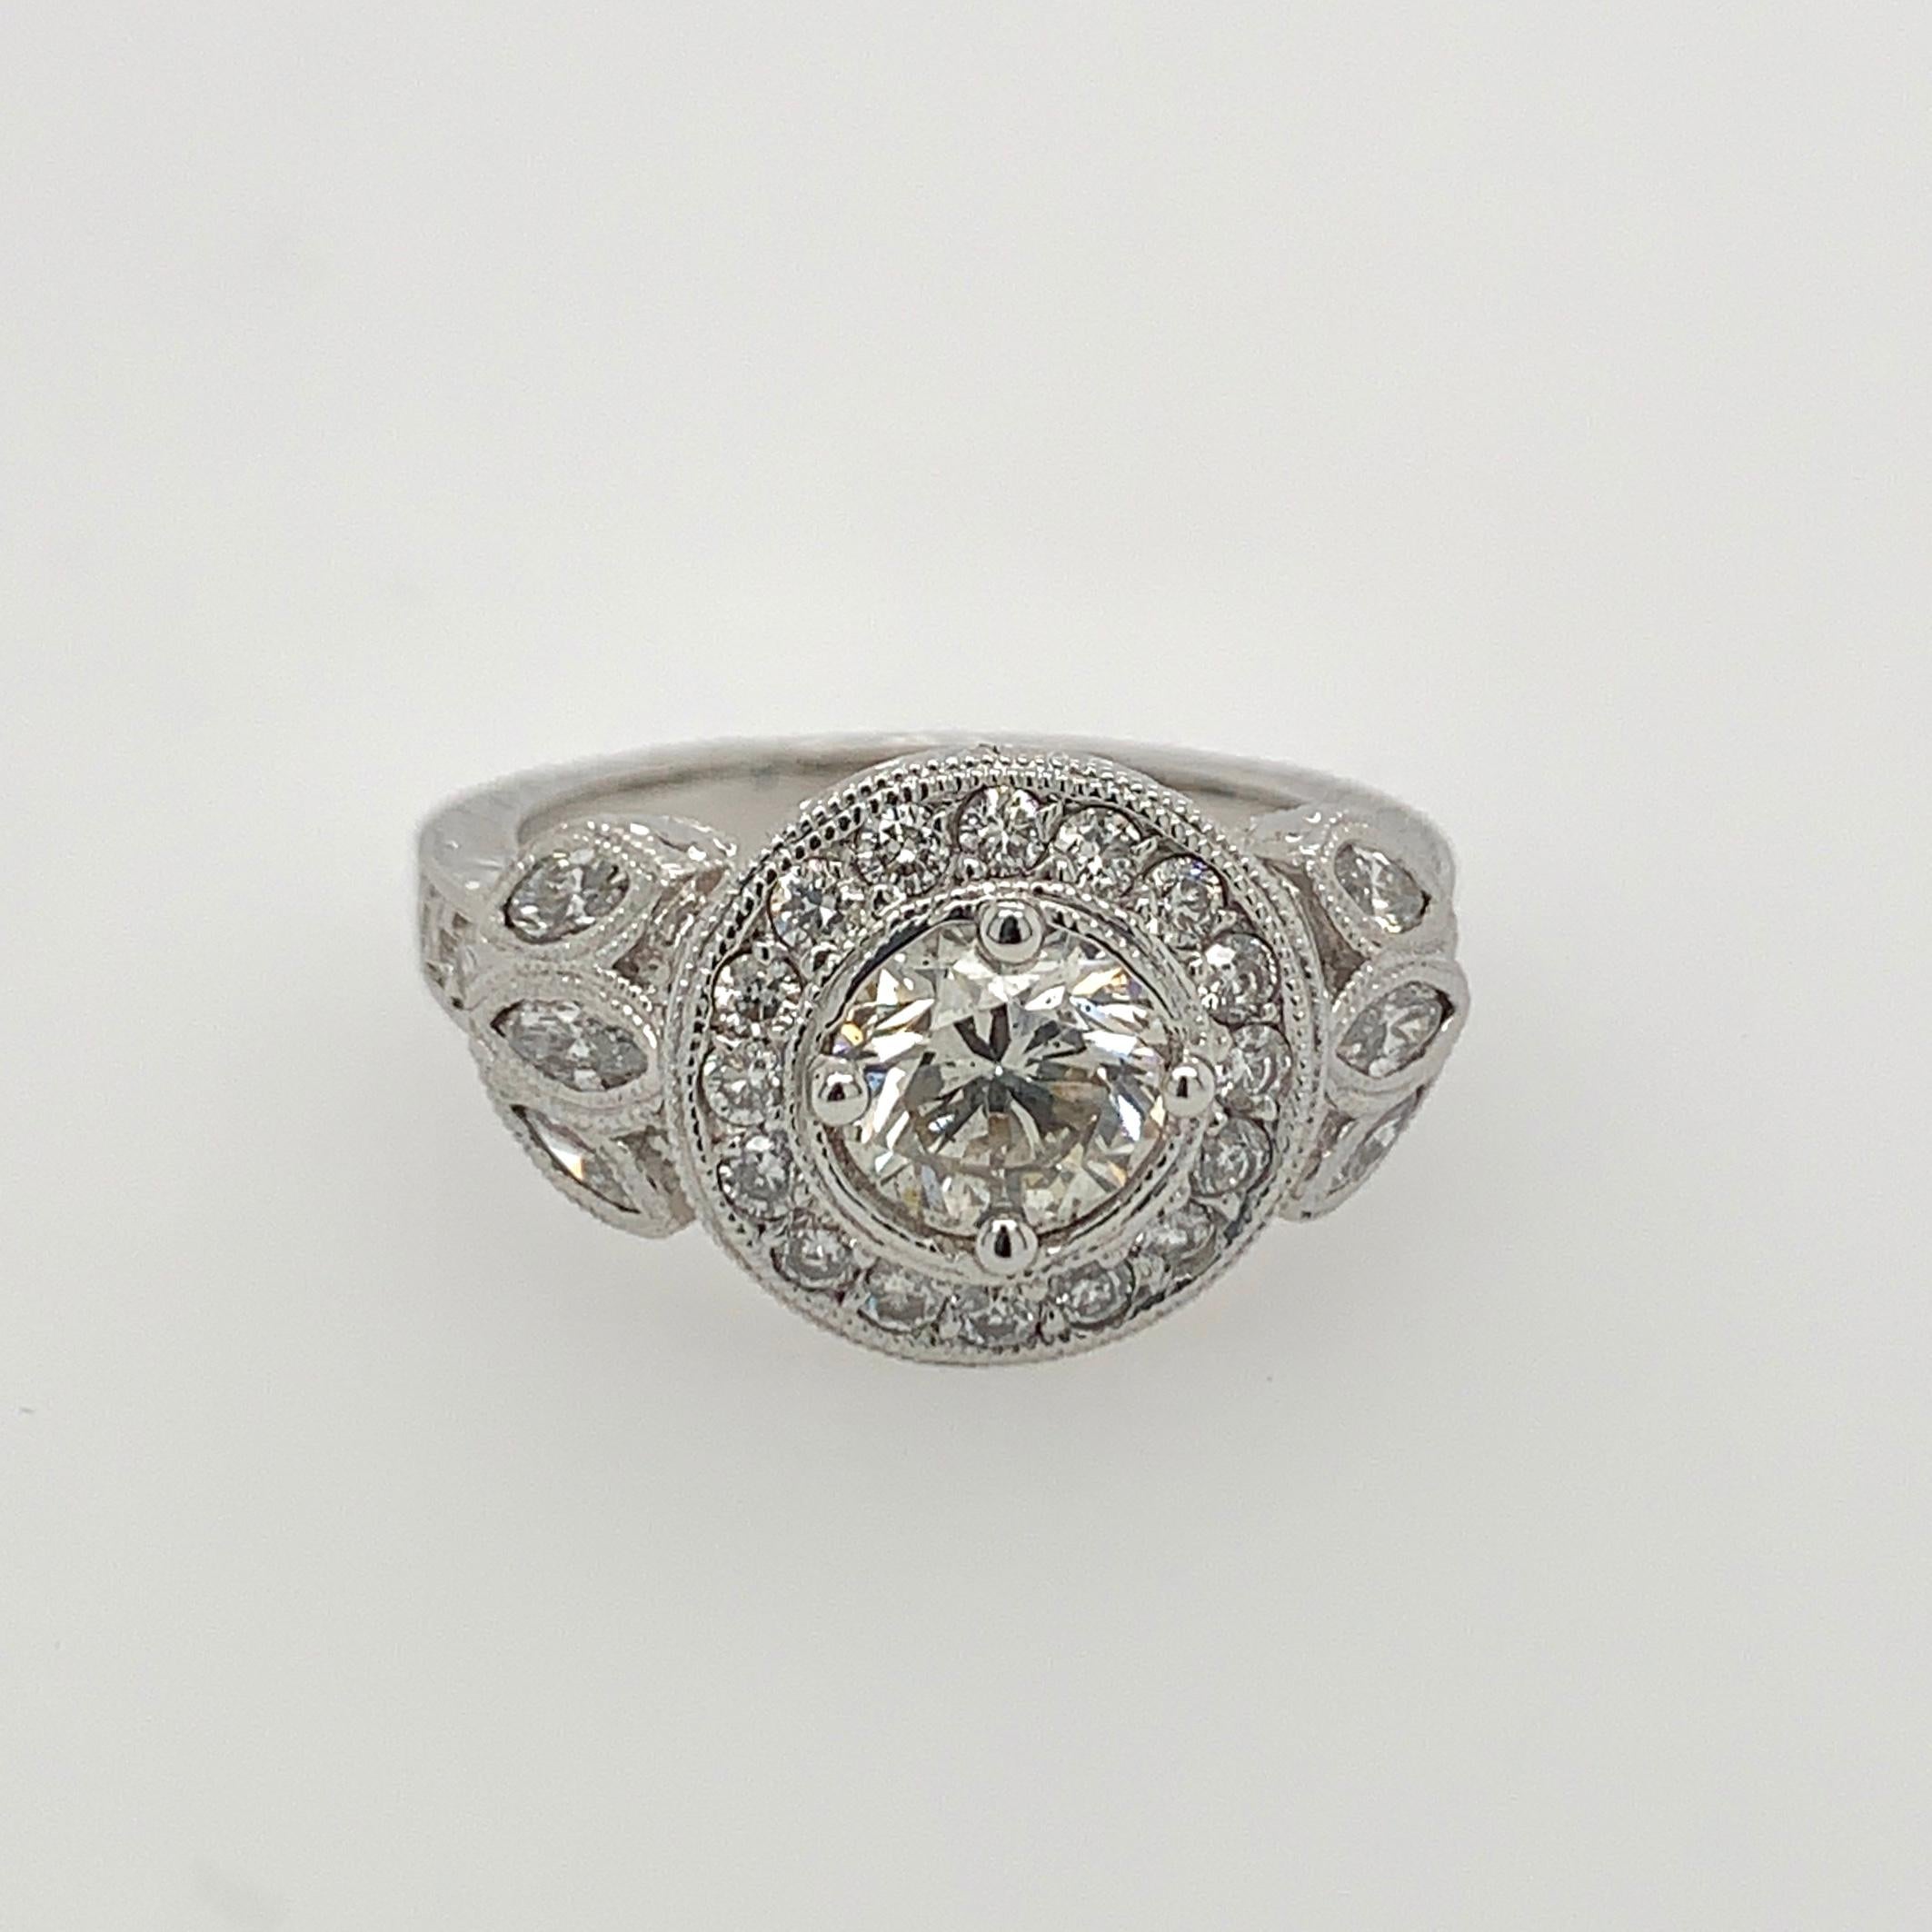 14K white gold contemporary diamond ring with 1.04ct brilliant cut center diamond SI2 clarity, K color, and very brilliant! It is complimented by 22 brilliant cut and 6 marquise cut diamonds. Total weight of this beautiful ring is approximately